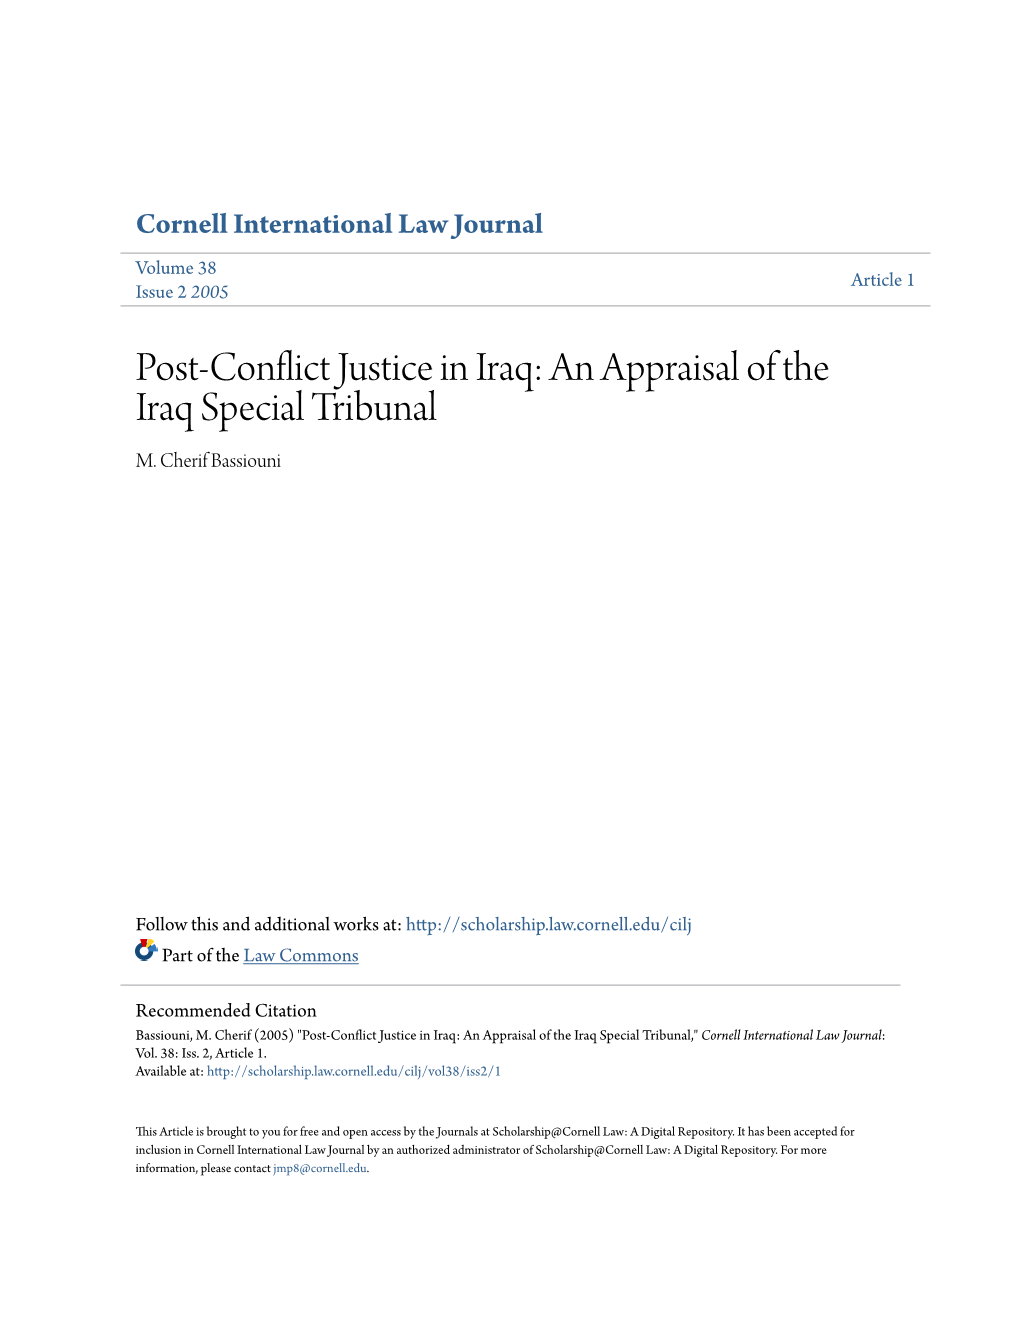 Post-Conflict Justice in Iraq: an Appraisal of the Iraq Special Tribunal M